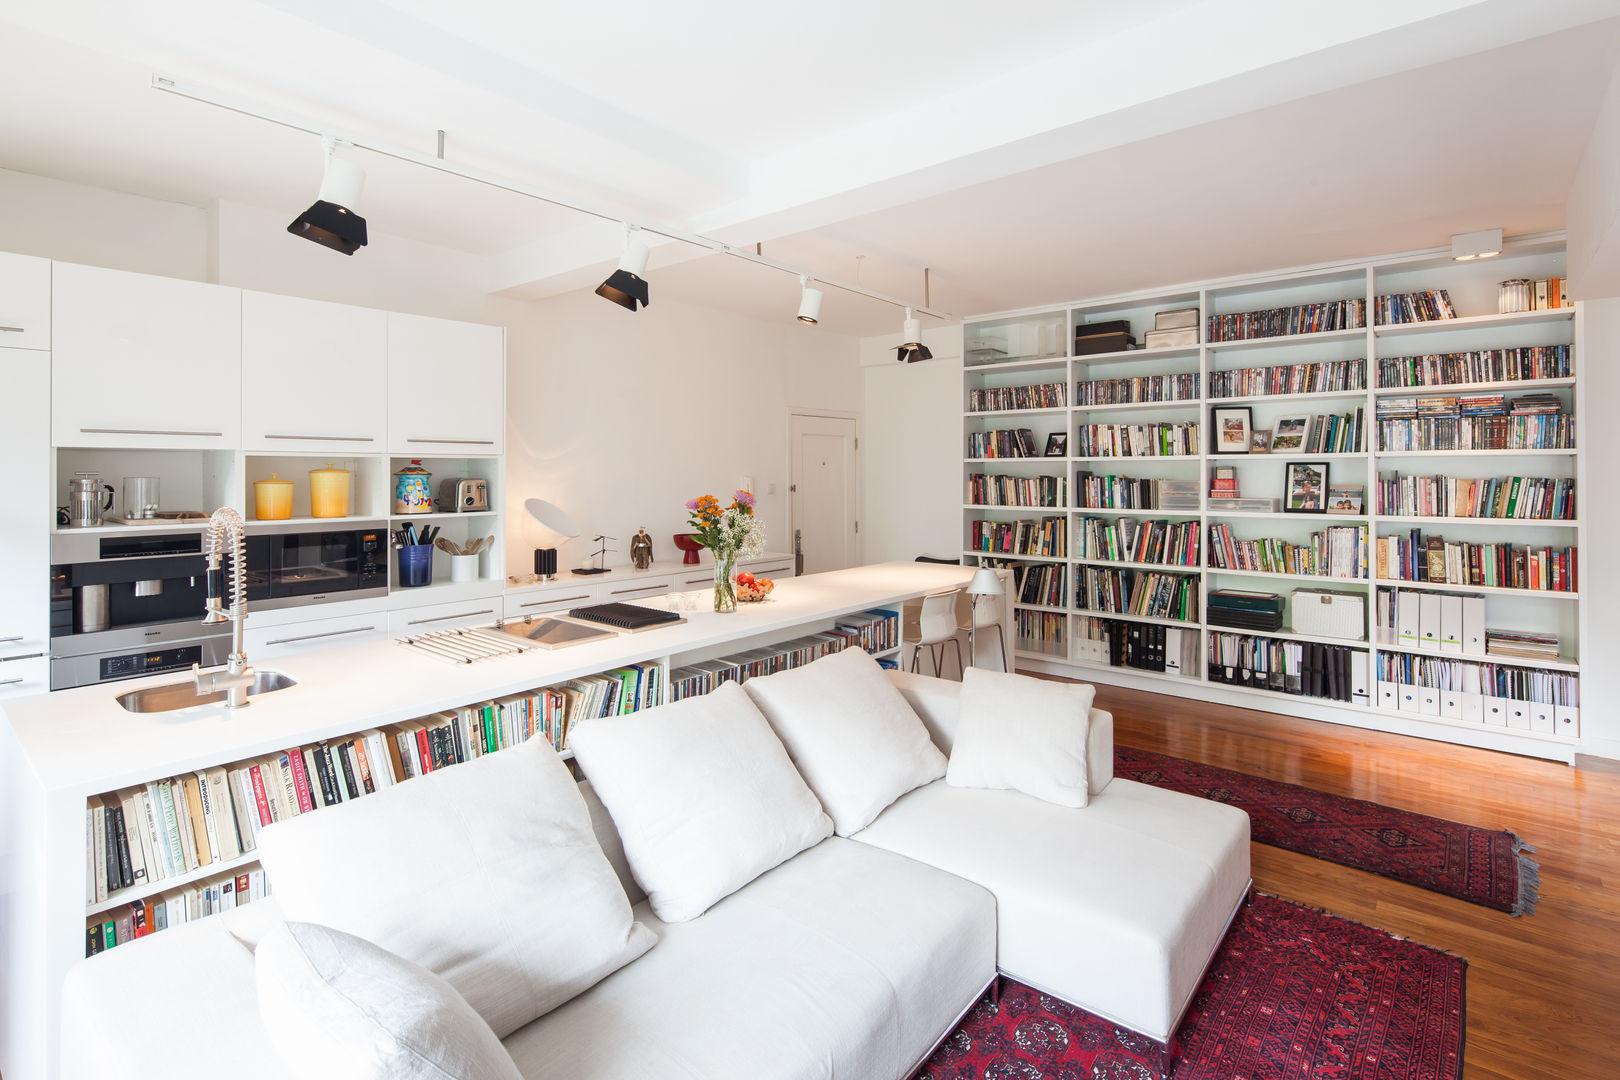 Discovery Bay Flat, HK, atelier blur / georges hung architecte d.p.l.g. atelier blur / georges hung architecte d.p.l.g. Modern living room Bookcase,Picture frame,Furniture,Couch,Shelf,Publication,Book,Shelving,Lighting,Television